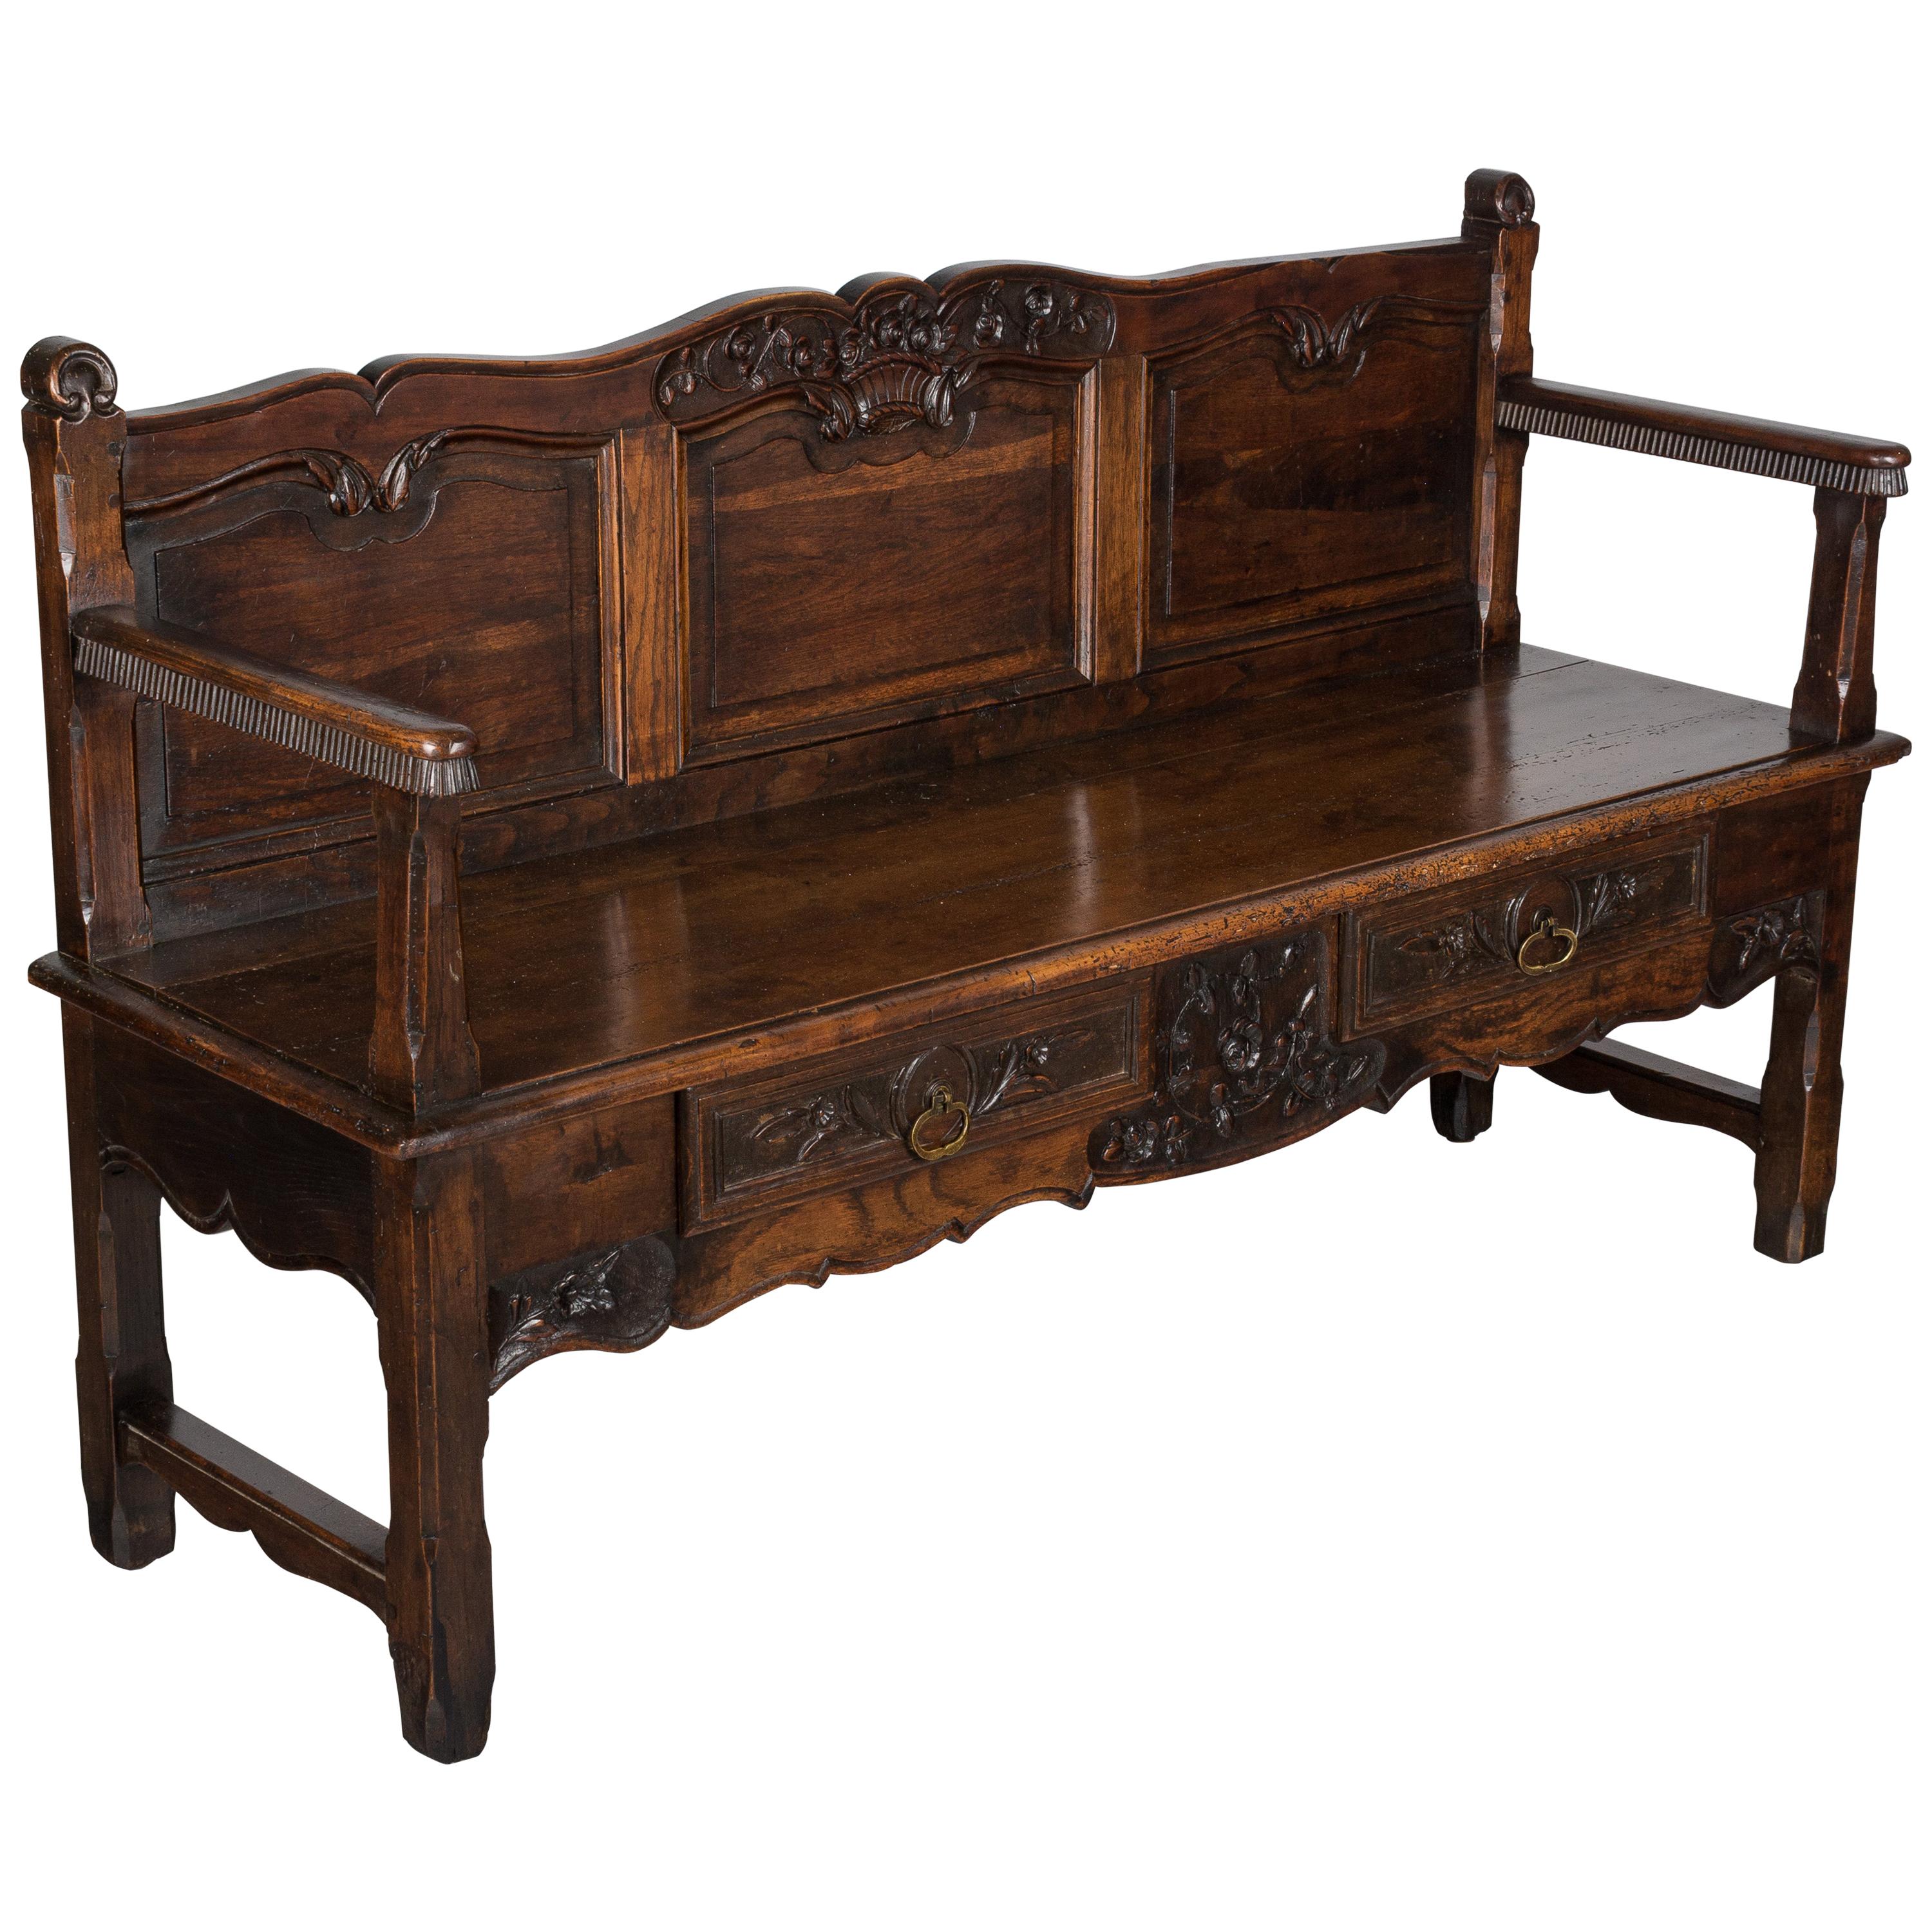 Early 19th Century French Provencal Bench